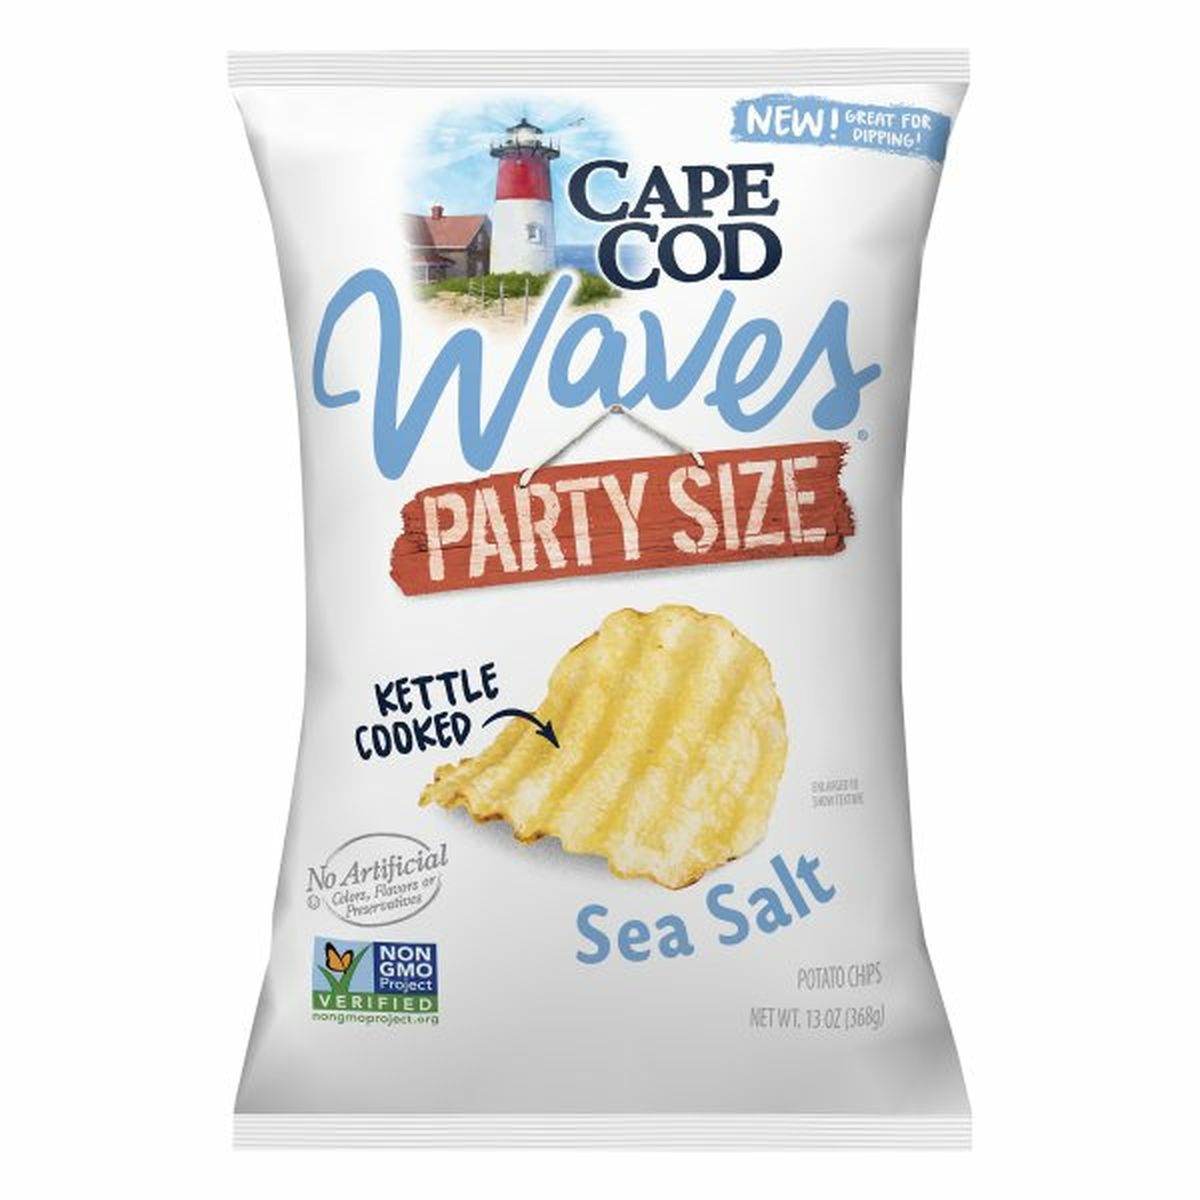 Calories in Cape Cods Waves Potato Chips, Sea Salt, Kettle Cooked, Party Size